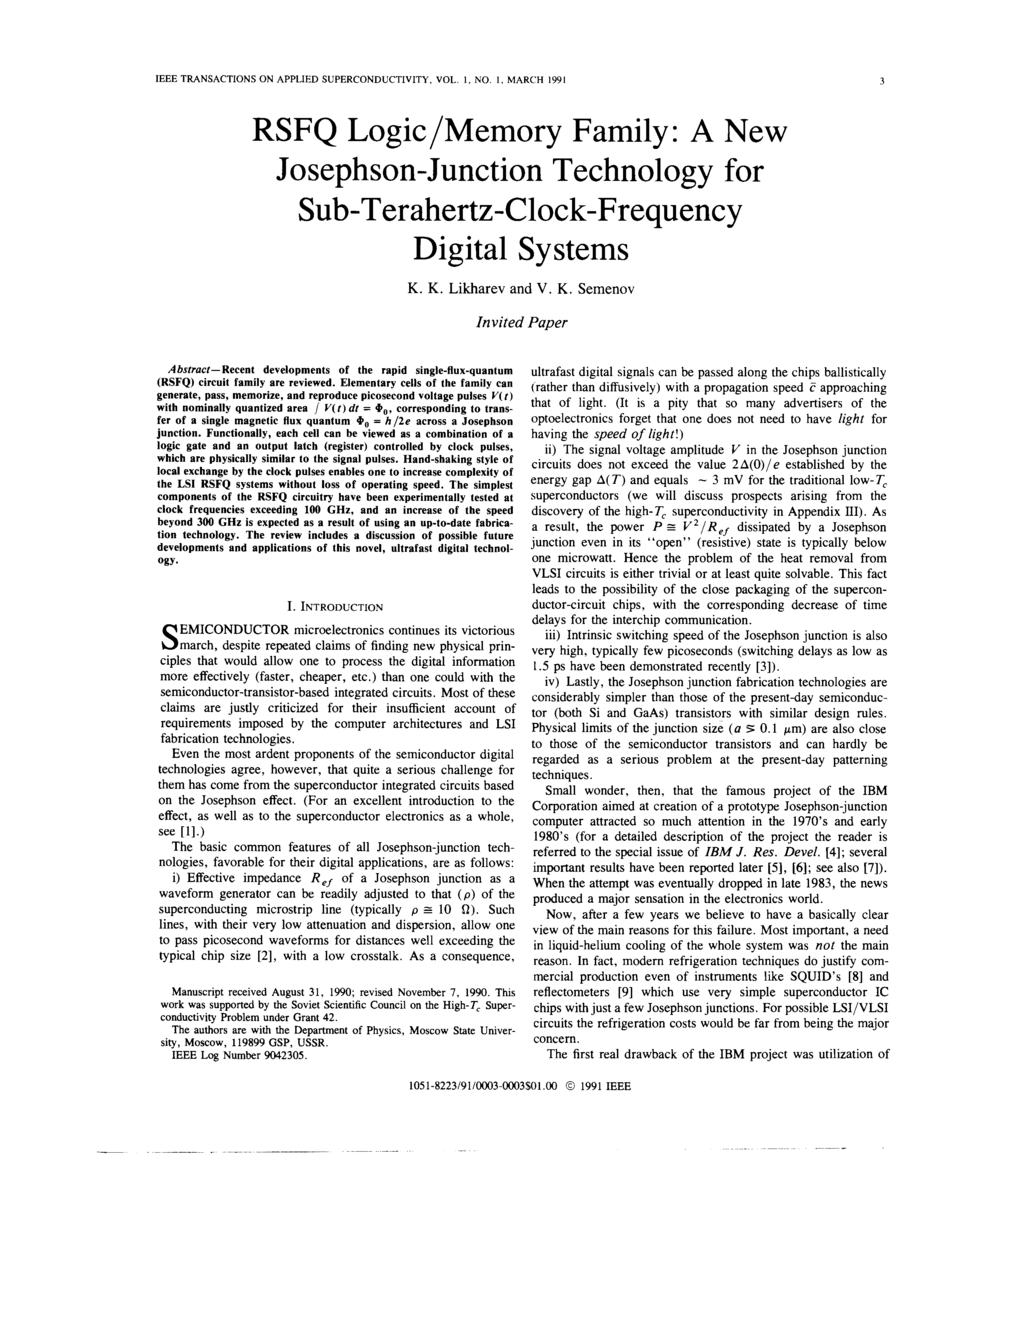 IEEE TRANSACTIONS ON APPLIED SUPERCONDUCTIVITY, VOL. I, NO. I, MARCH 1991 RSFQ Logic/Memory Family: A New Josephson-Junction Technology for Sub-Terahertz-Clock-Frequency Digital Systems K.